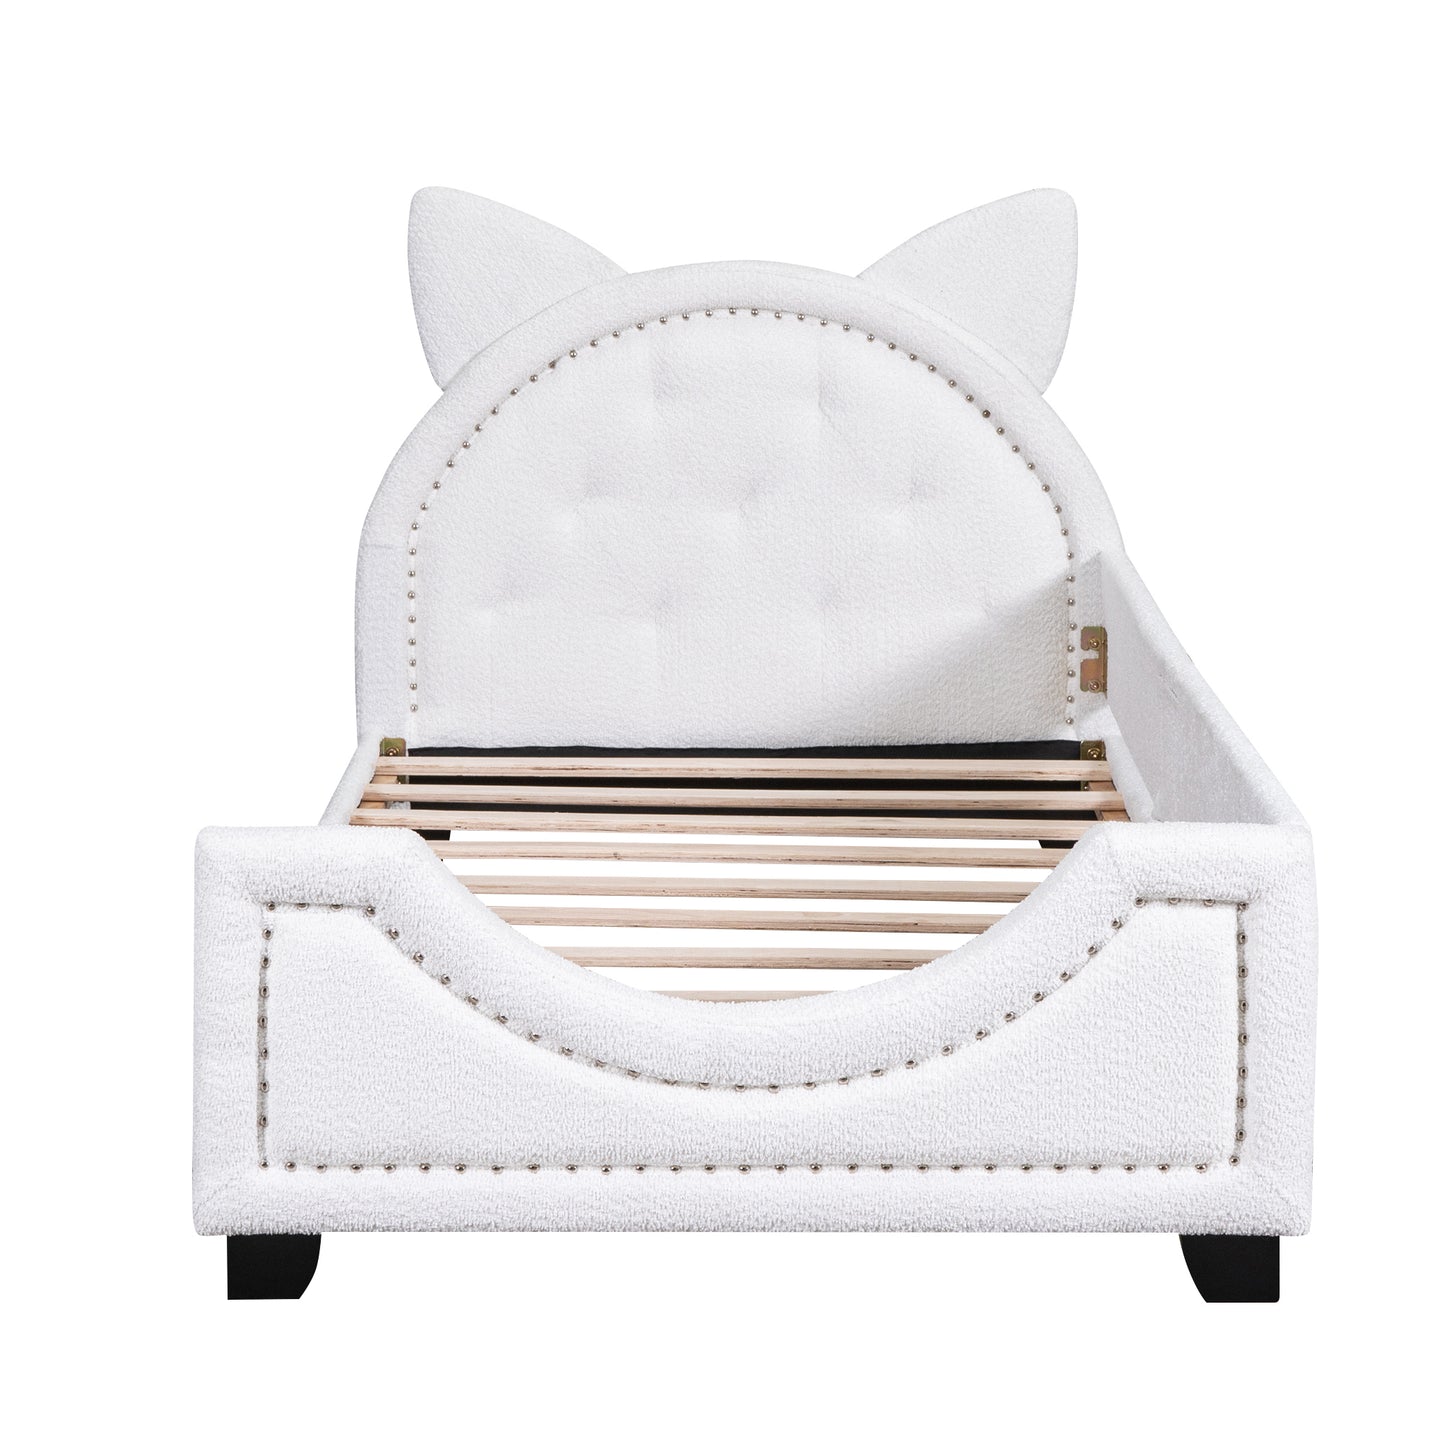 Teddy Fleece Twin Size Upholstered Daybed with Carton Ears Shaped Headboard, White